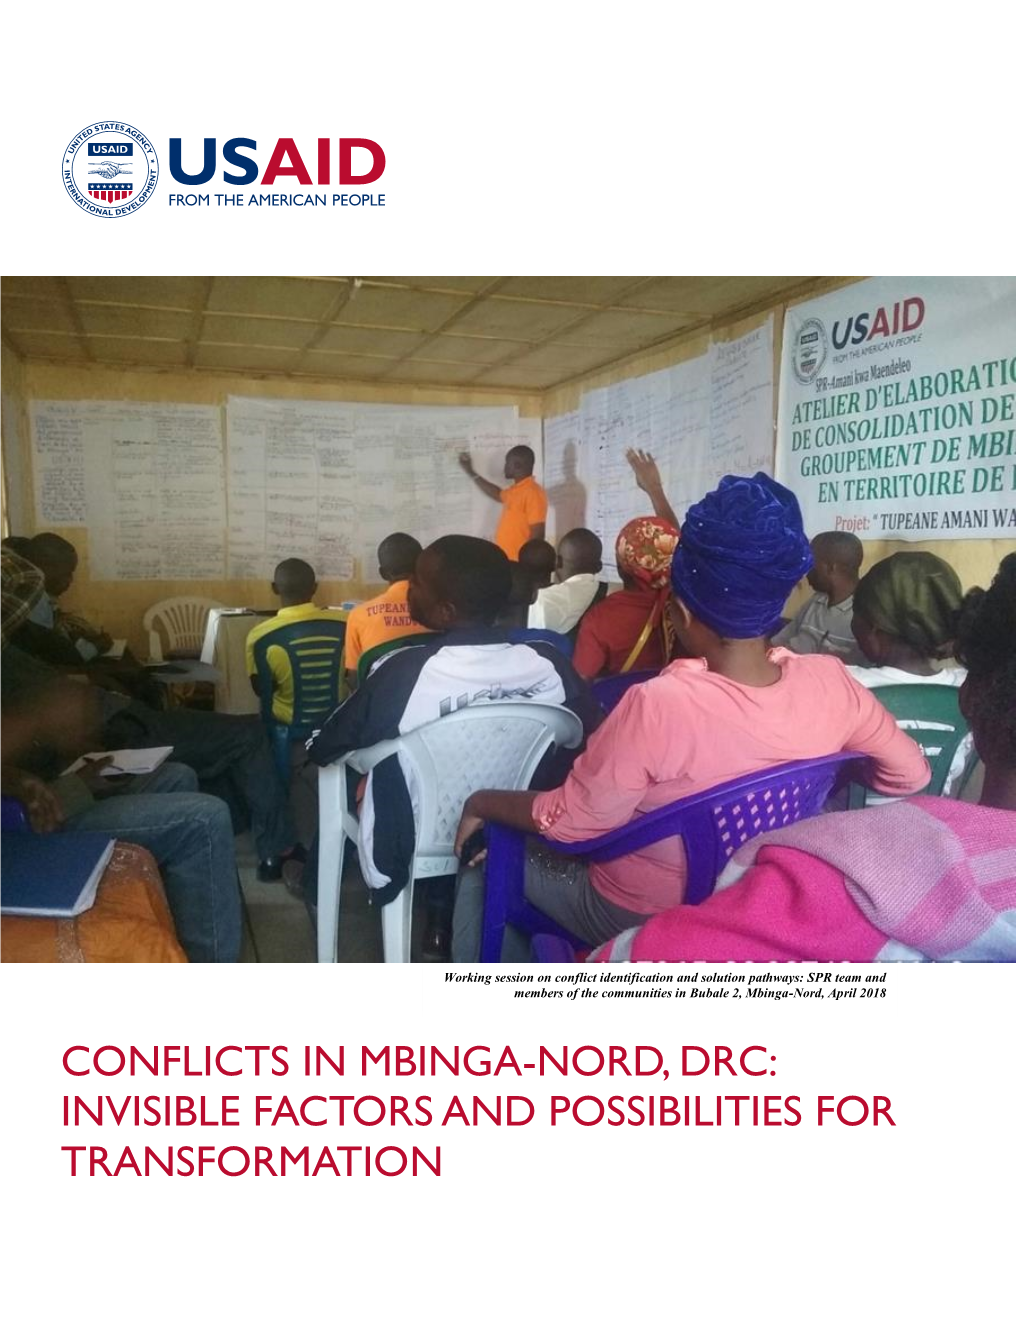 Conflicts in Mbinga-Nord, Drc: Invisible Factors and Possibilities for Transformation